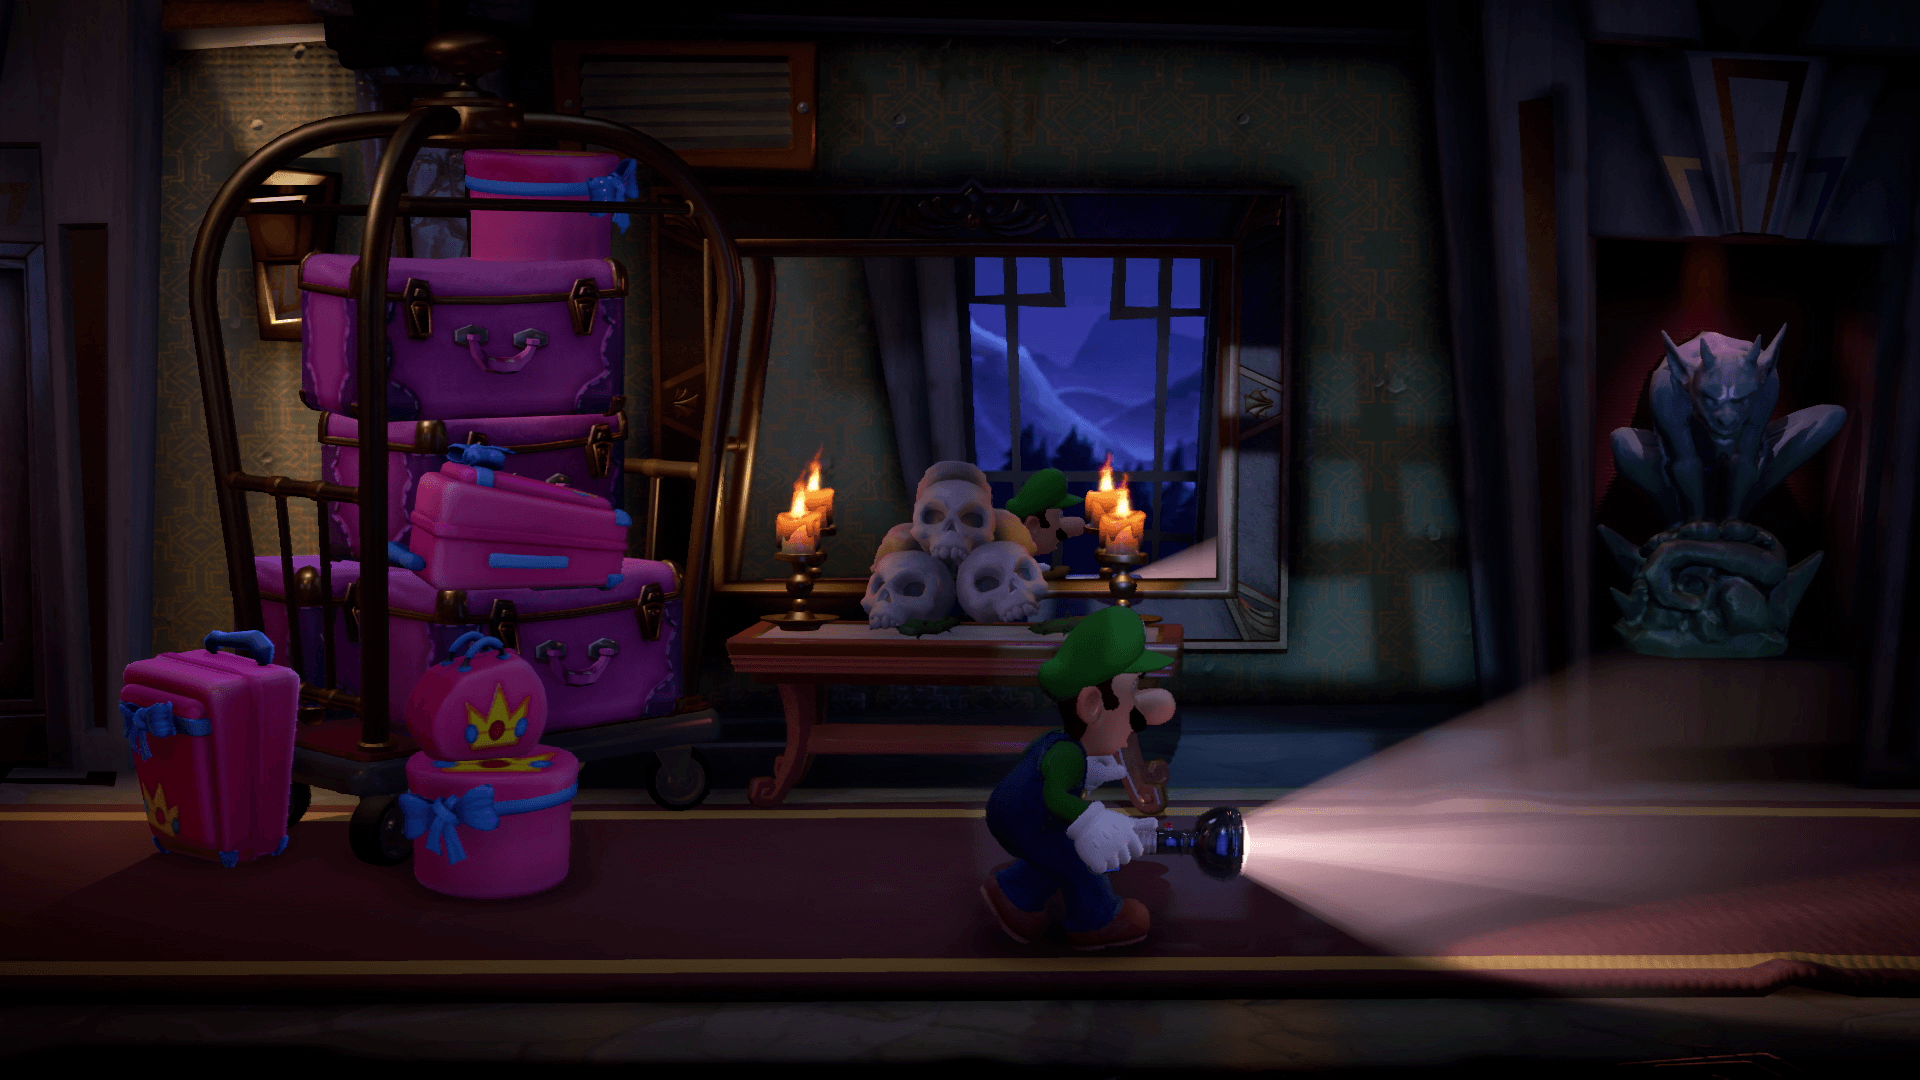 Luigi's Mansion 3 is looking great in this direct capture E3